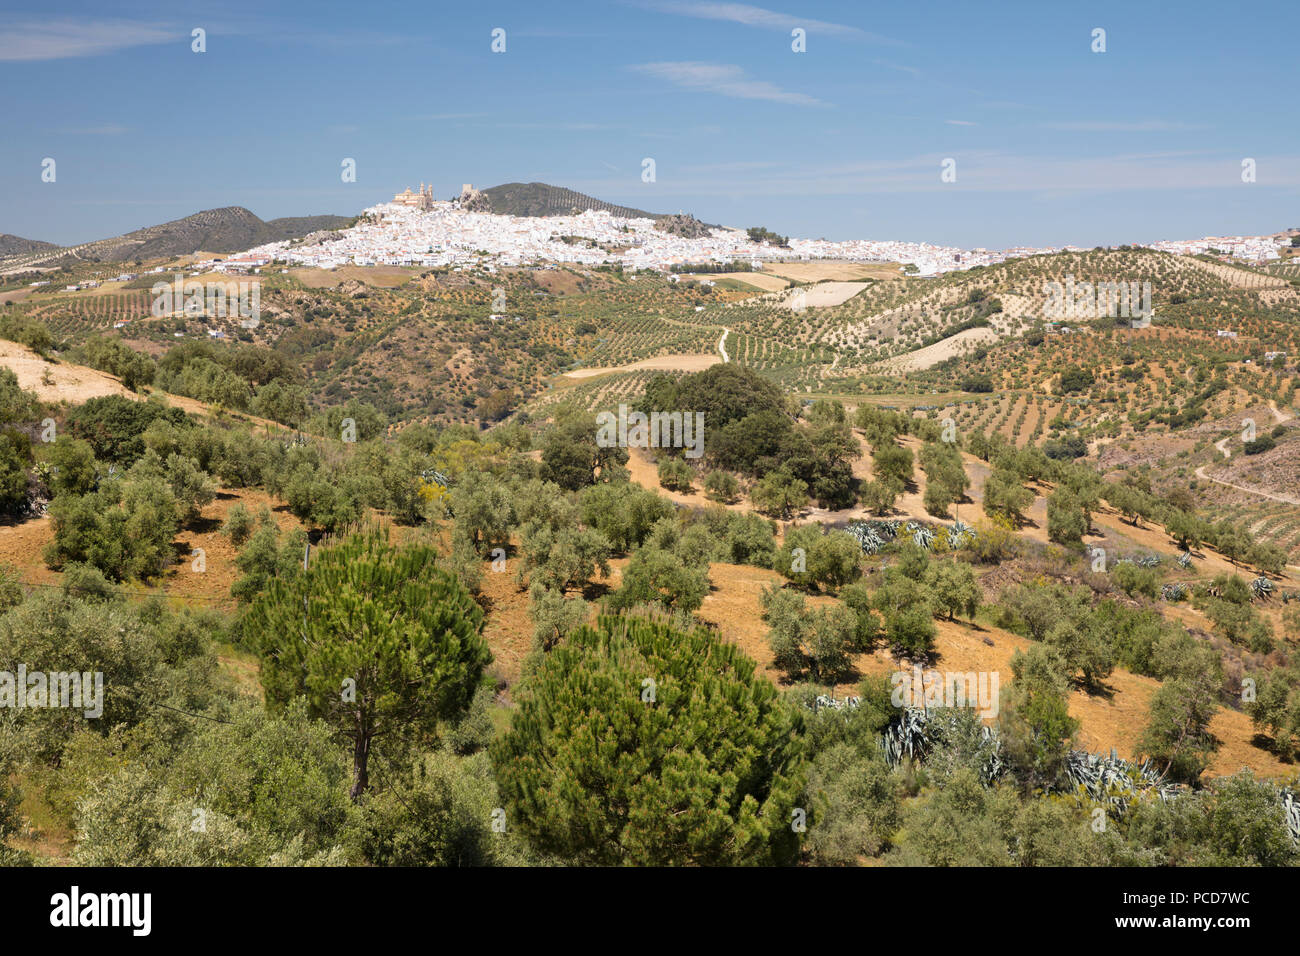 Typical Andalucian landscape with olive groves and white town of Olvera, Cadiz Province, Andalucia, Spain, Europe Stock Photo